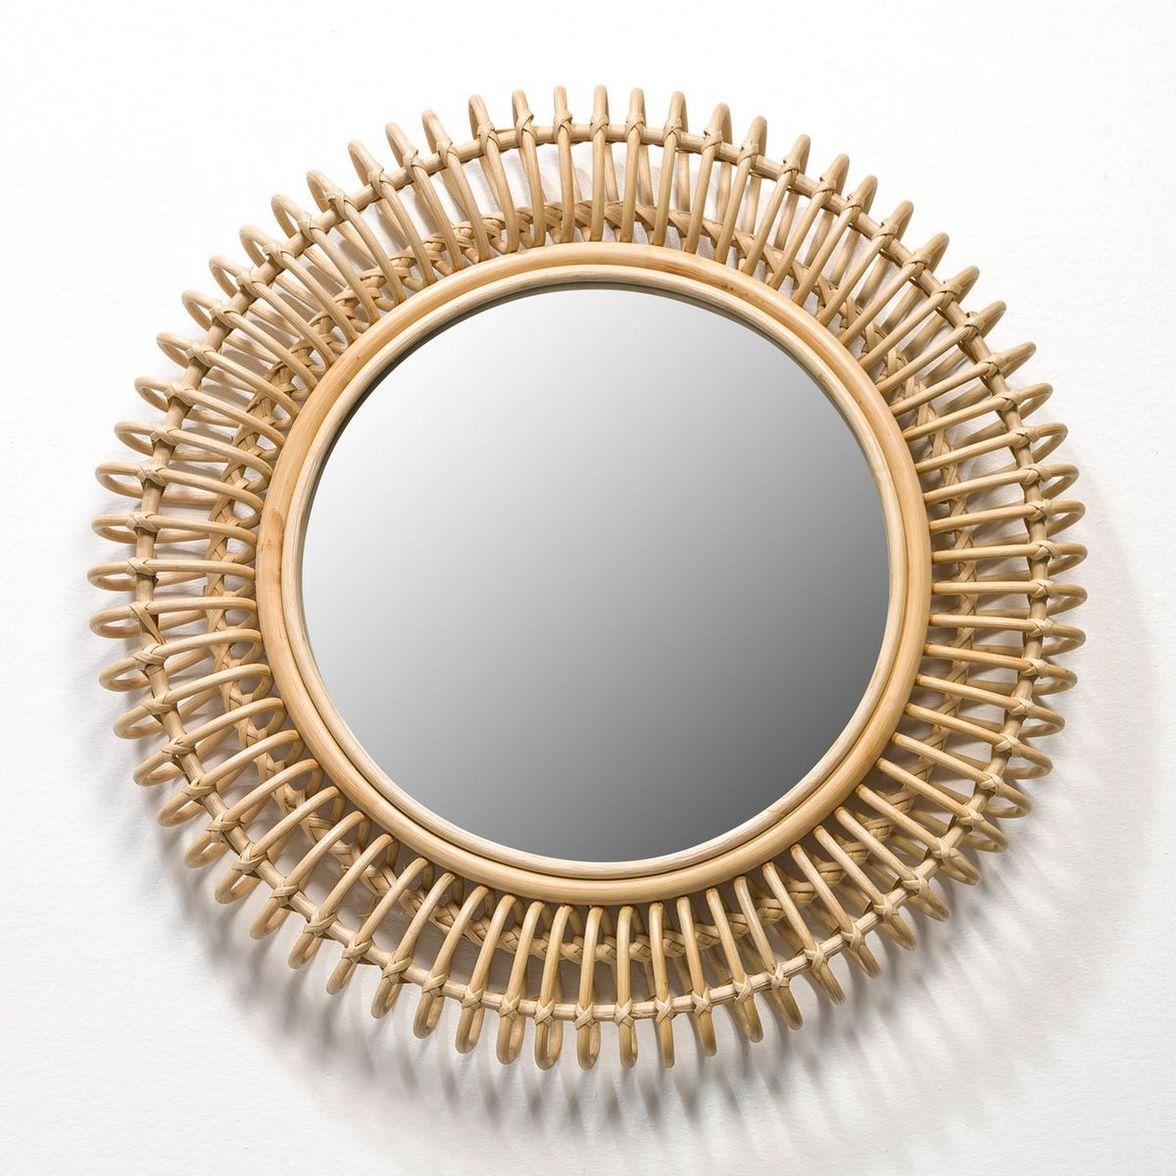 French design mirror composed of a round, curved and aerial rattan structure, Bohemian chic design and trendy style!